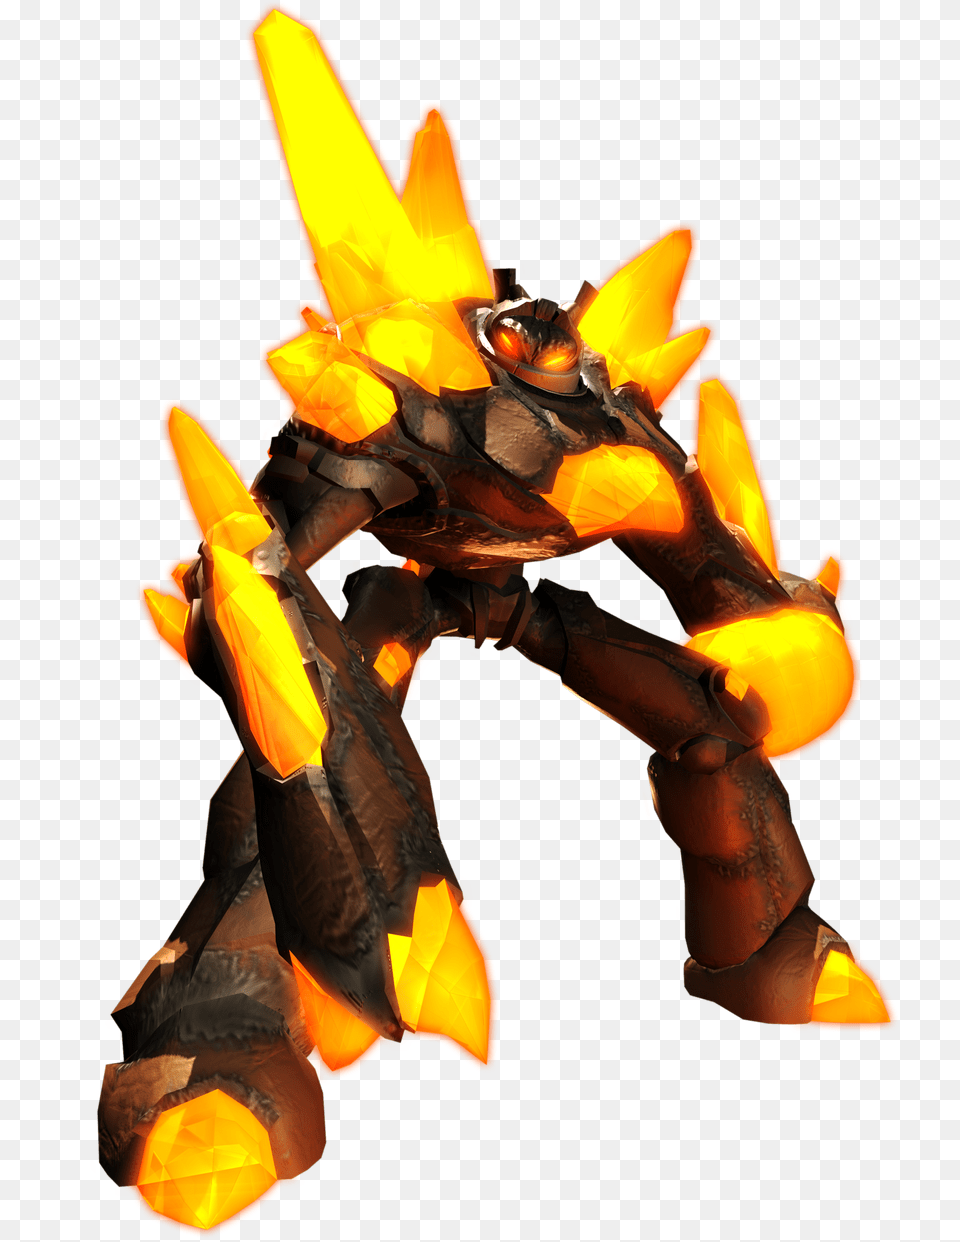 Hd Metroid Prime Hunters Characters, Fire, Flame, Animal, Invertebrate Png Image